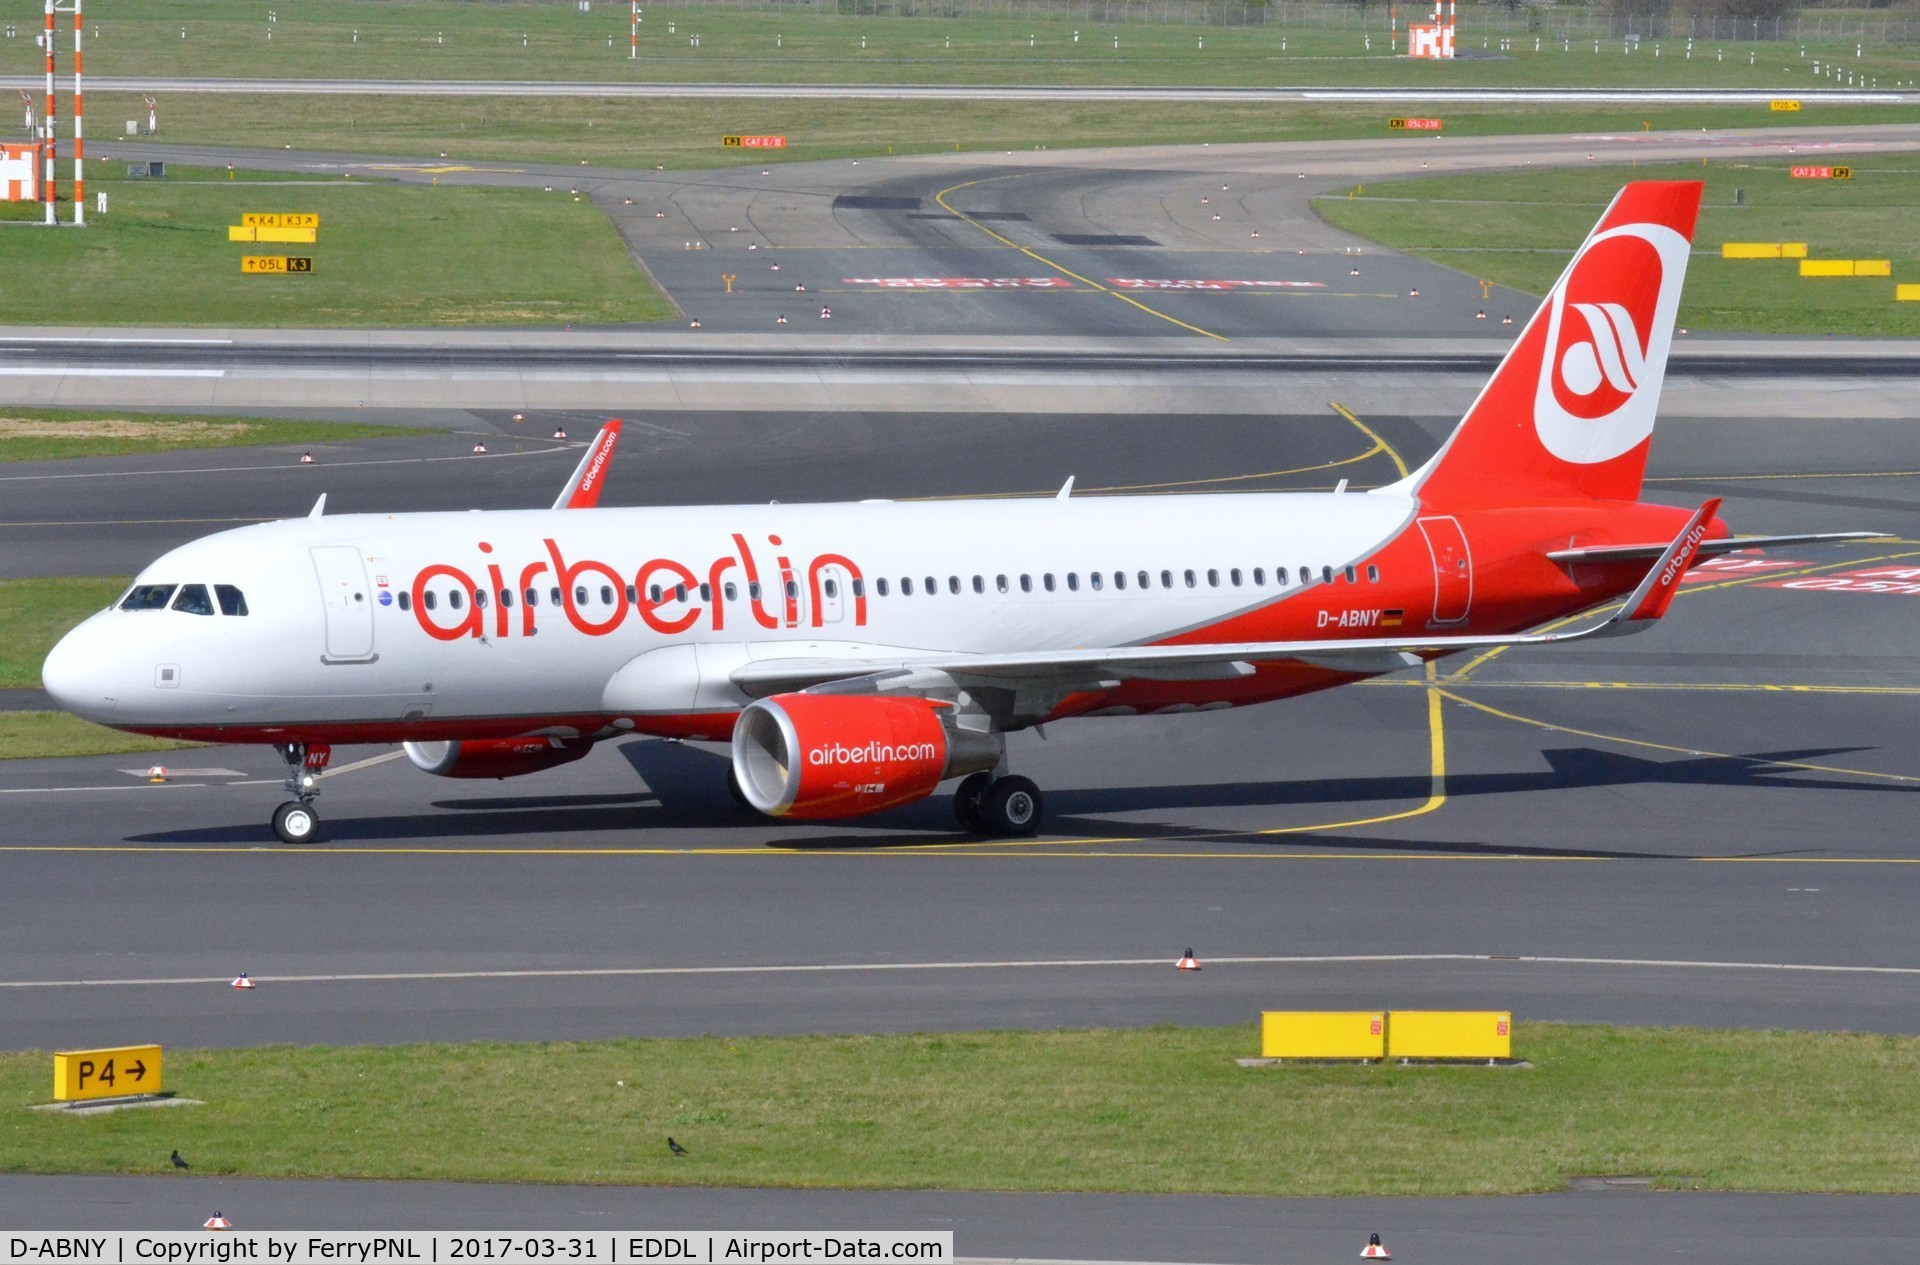 D-ABNY, 2016 Airbus A320-214 C/N 6966, Air Berlin A320 taxying in.